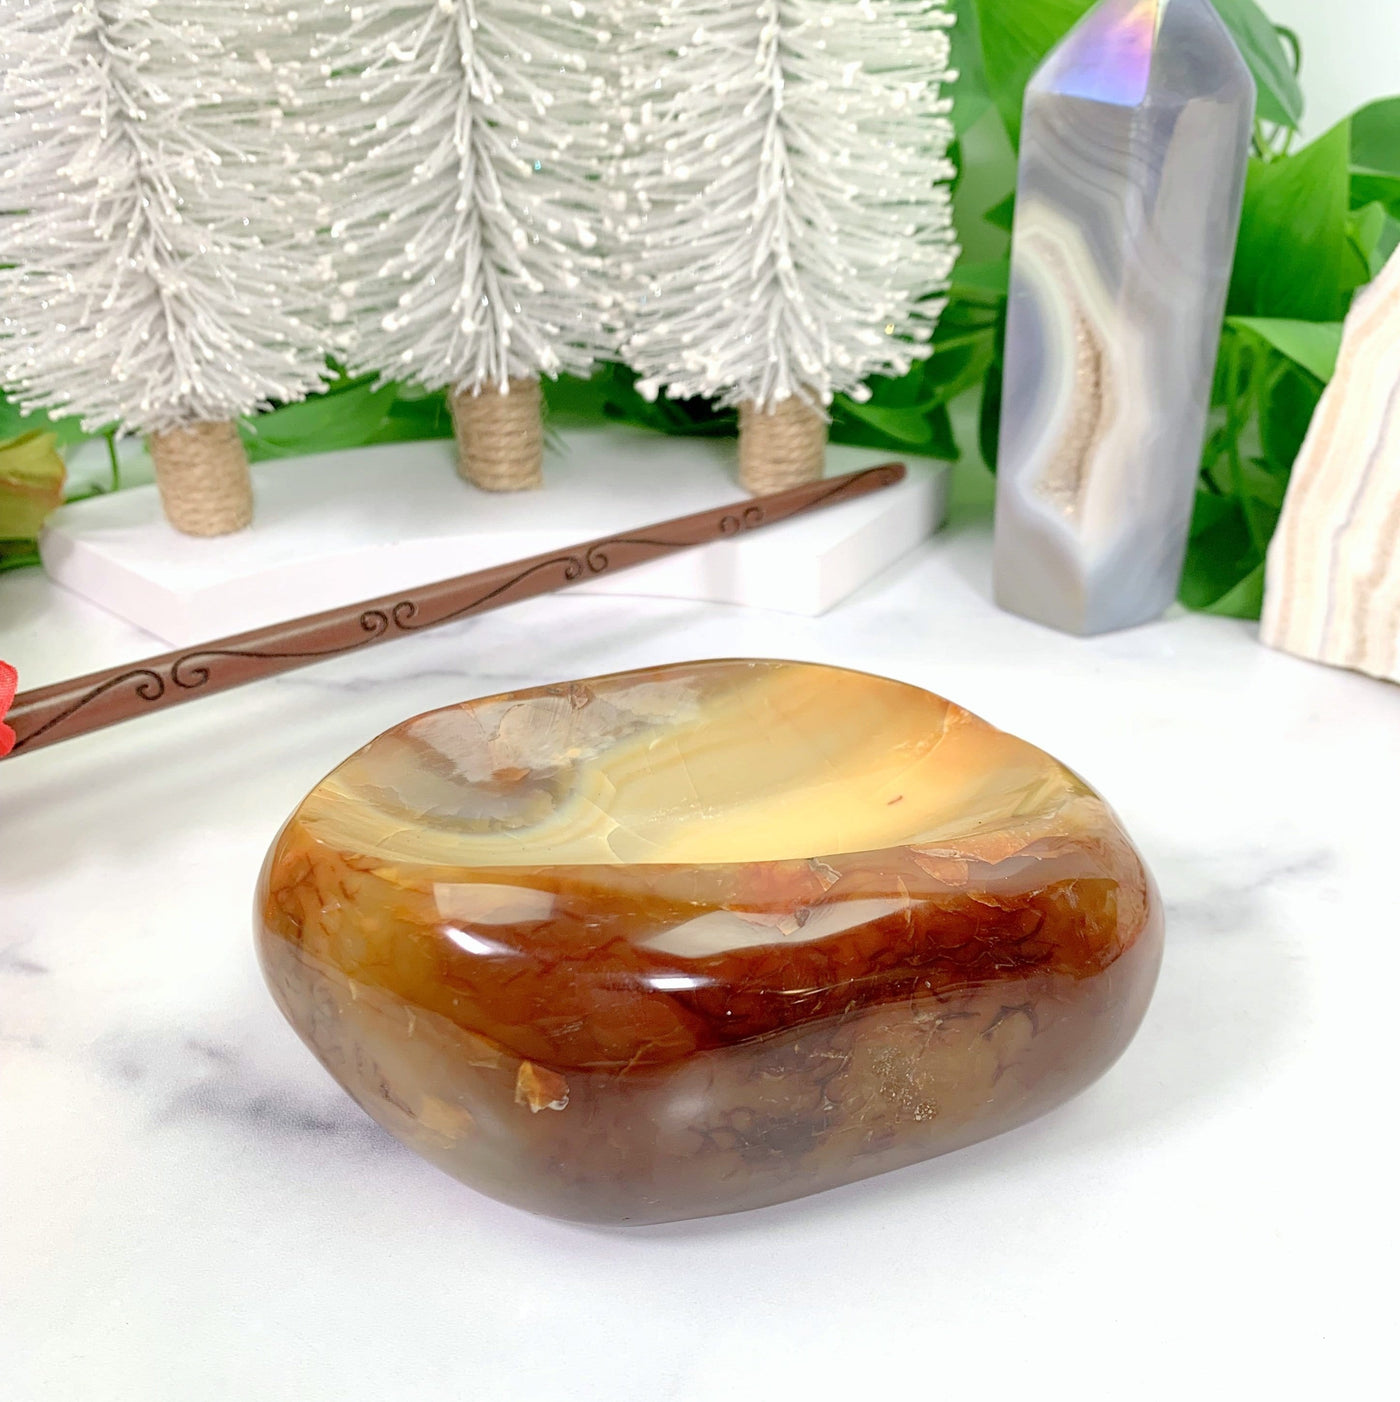 Polished Carnelian Decorative Bowl with decorations in the background